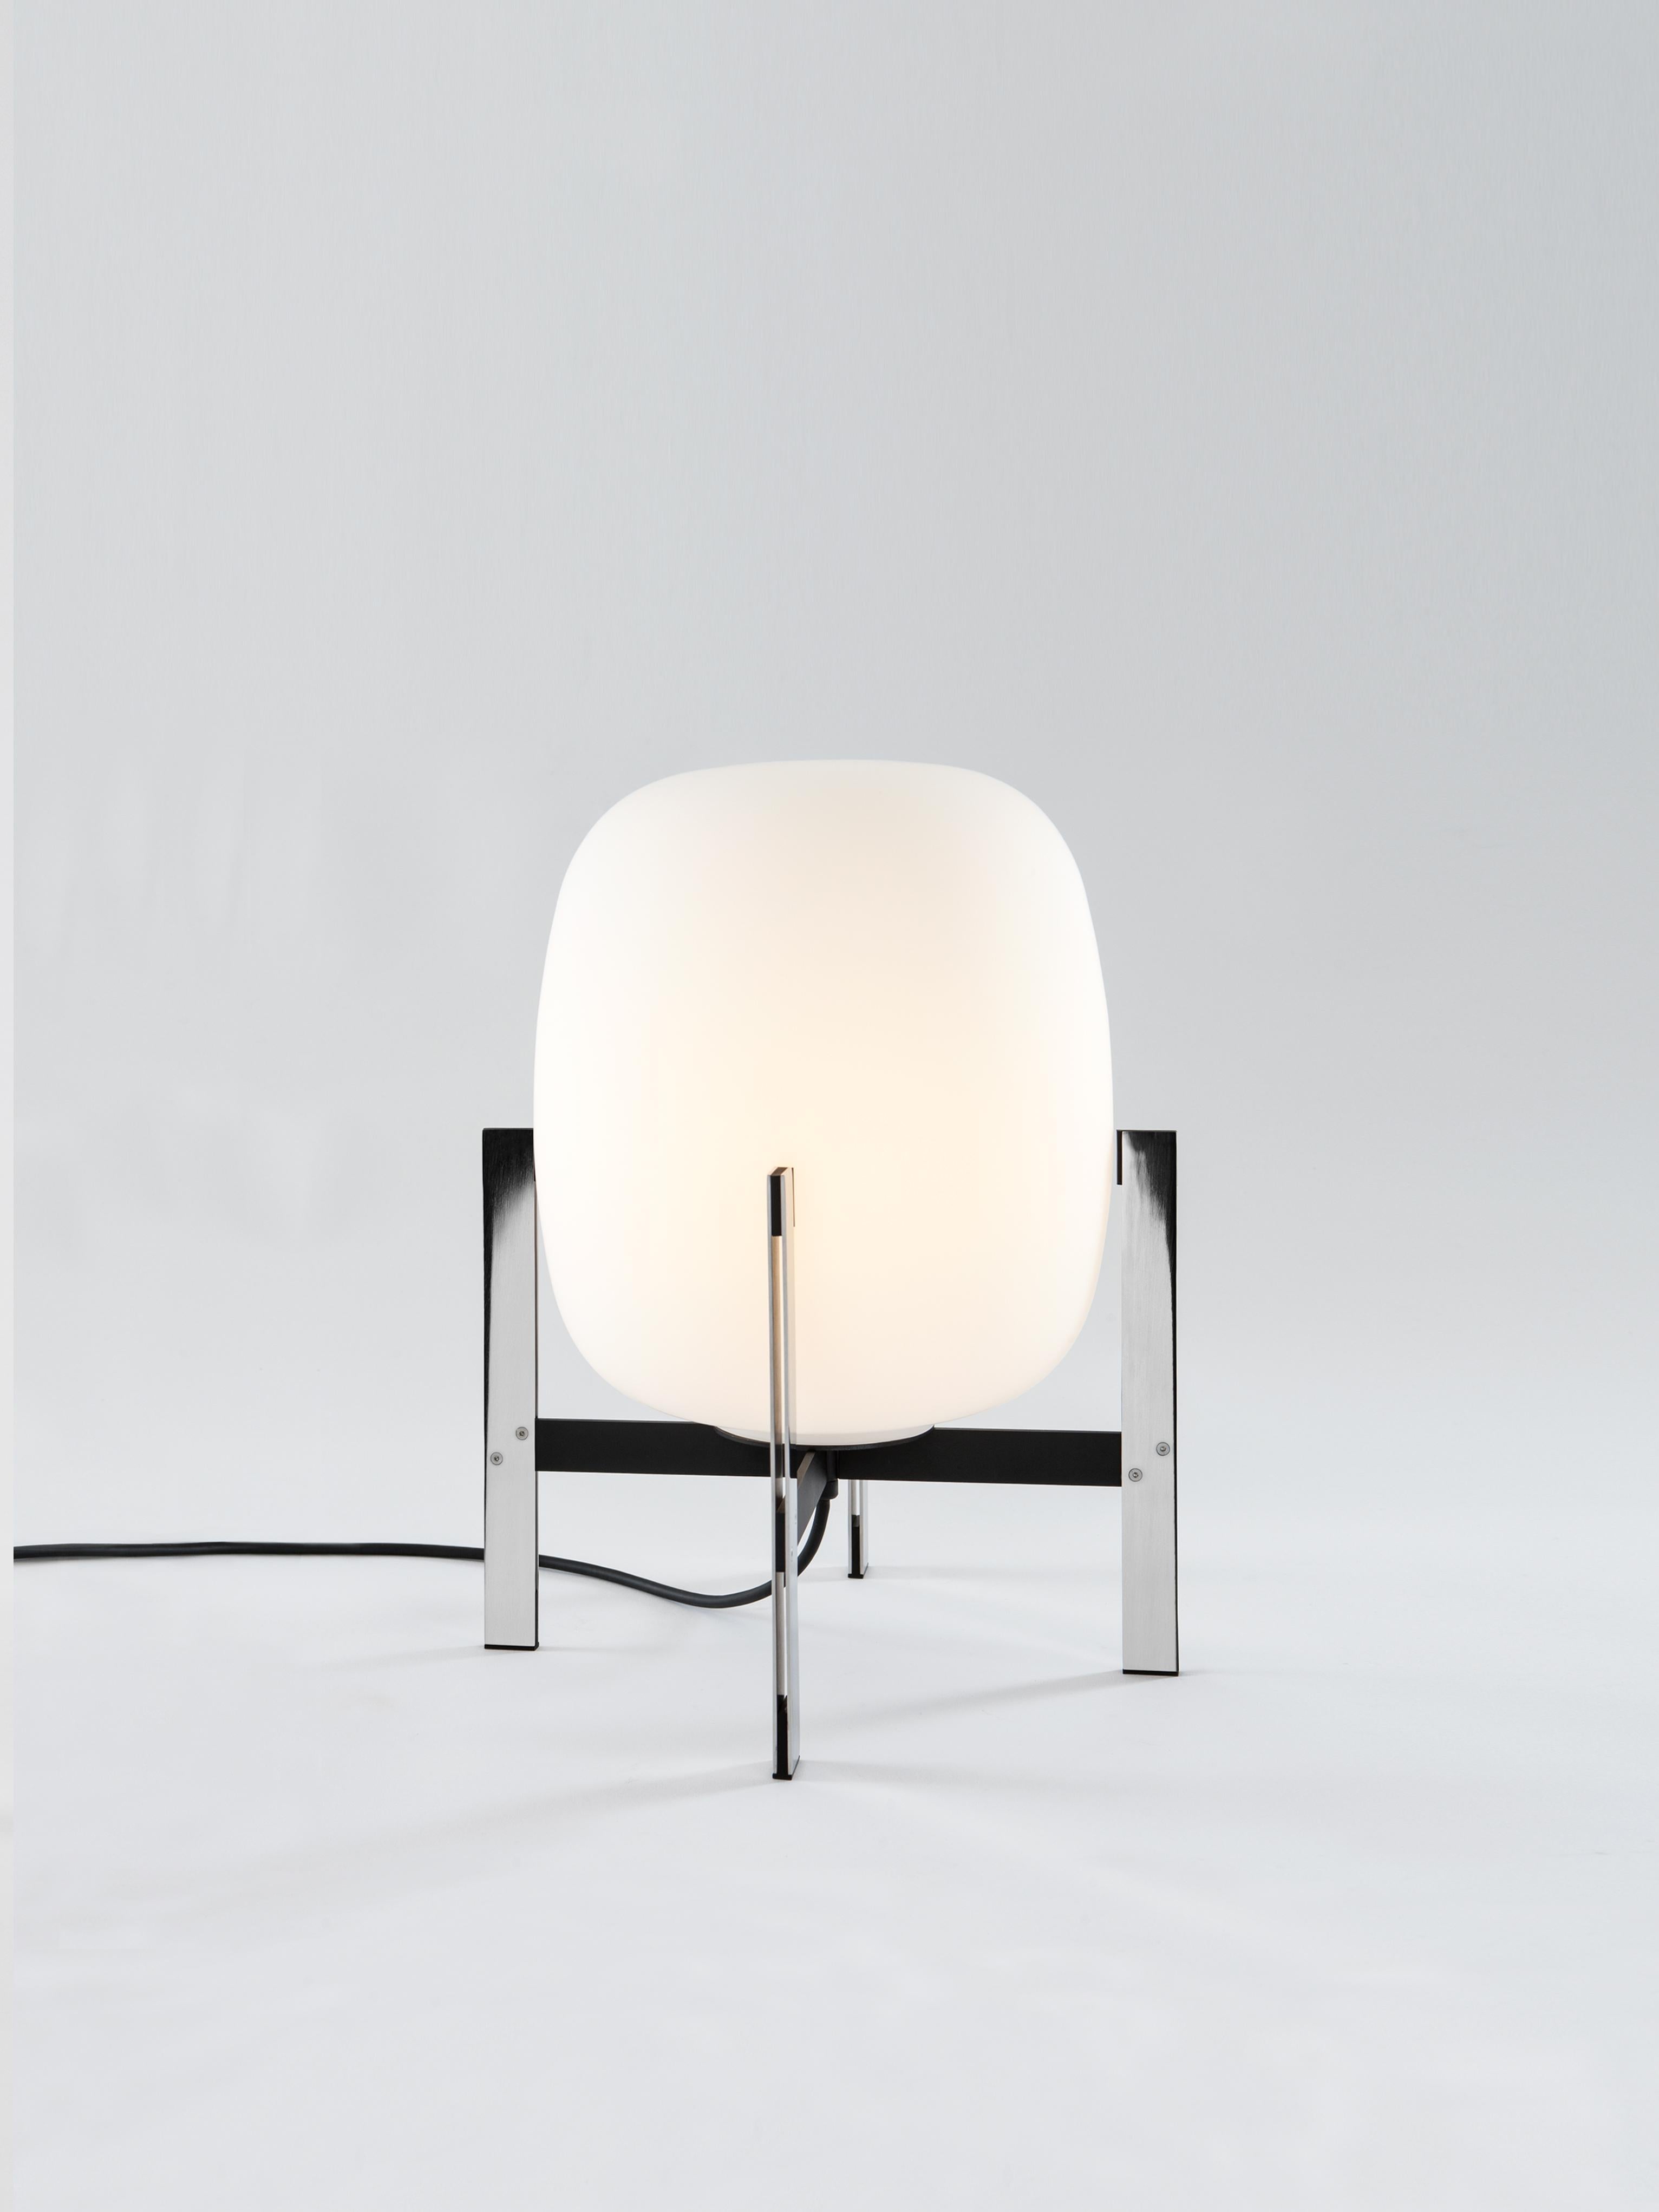 Cesta metálica table lamp by Miguel Milá
Dimensions: D 35 x H 42 cm
Materials: Steel, glass.
Available with or without leather handle.

Miguel Milá learned to master the expressiveness of steel by giving it a fragile heart. Strength and